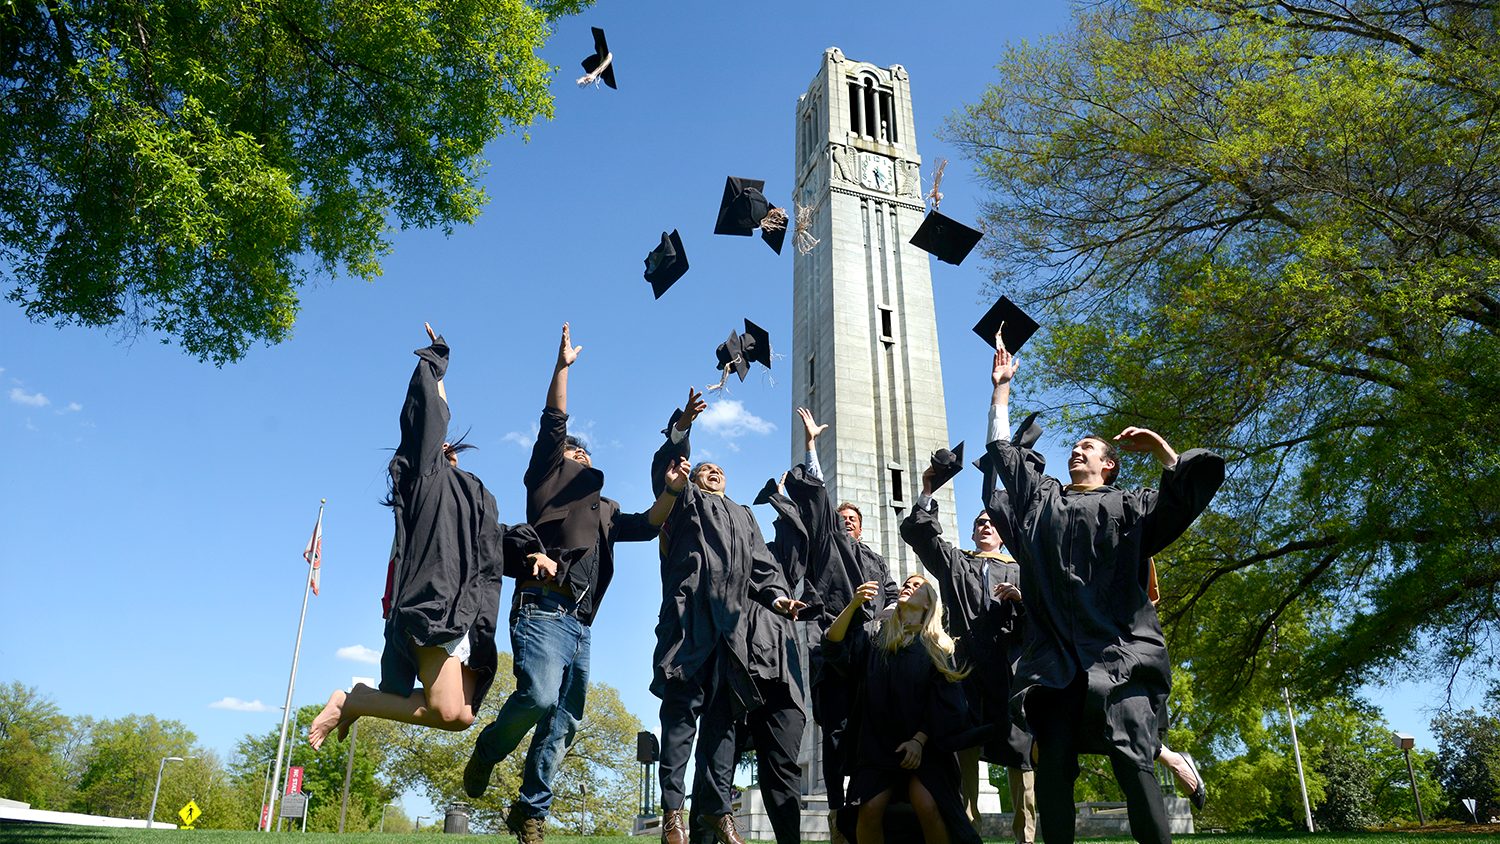 A group photo of Master students who are jumping for air in their black cap and gown in front of the NC State belltower.